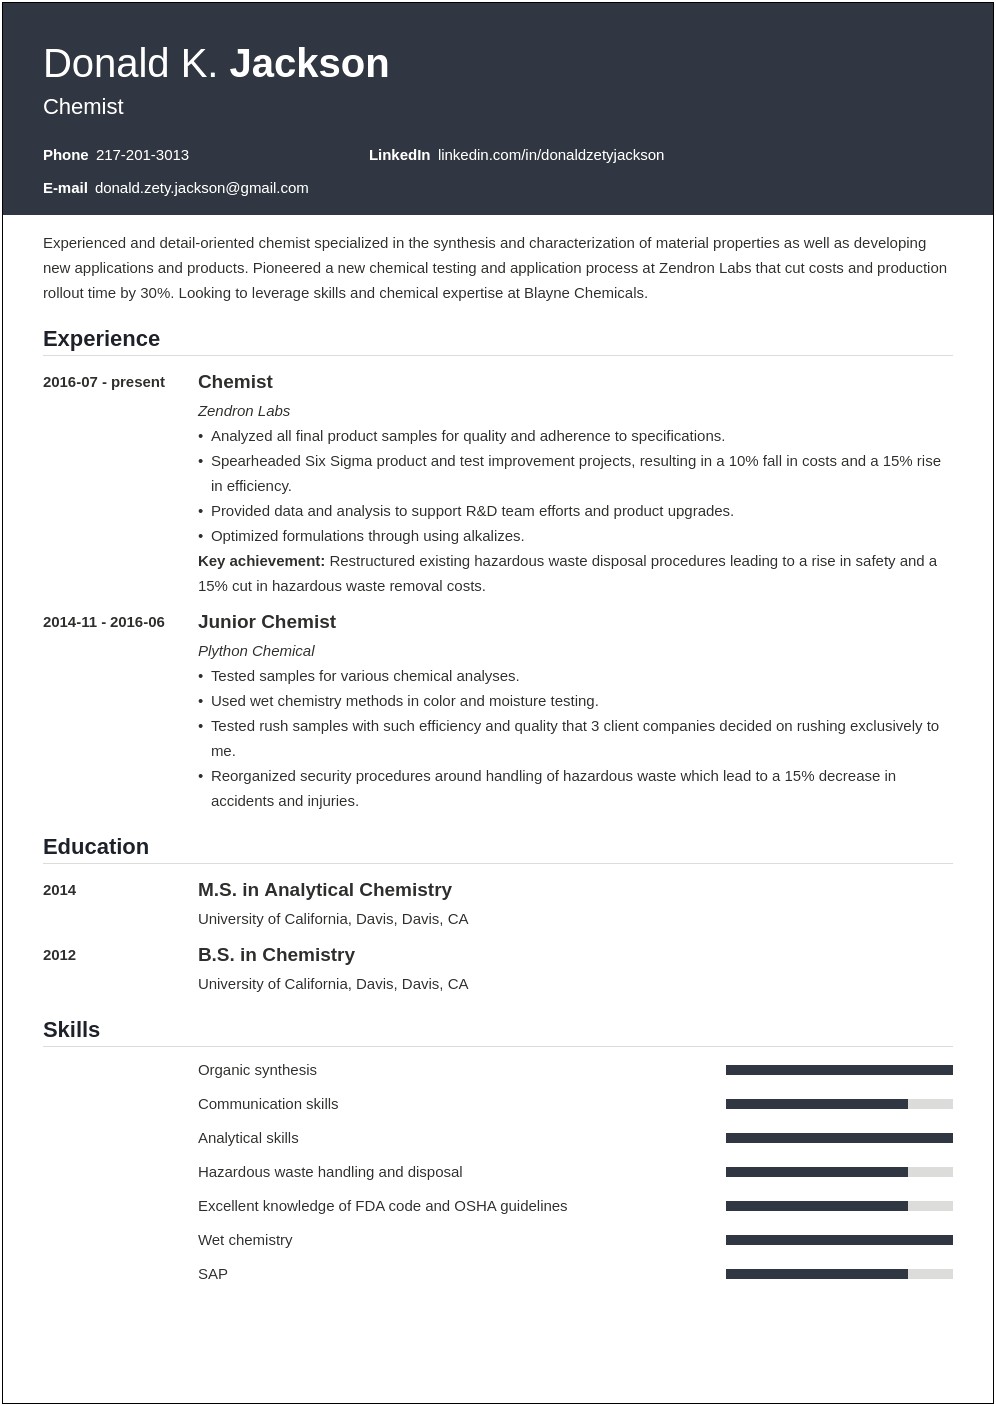 Resume Head Lines For Research Jobs